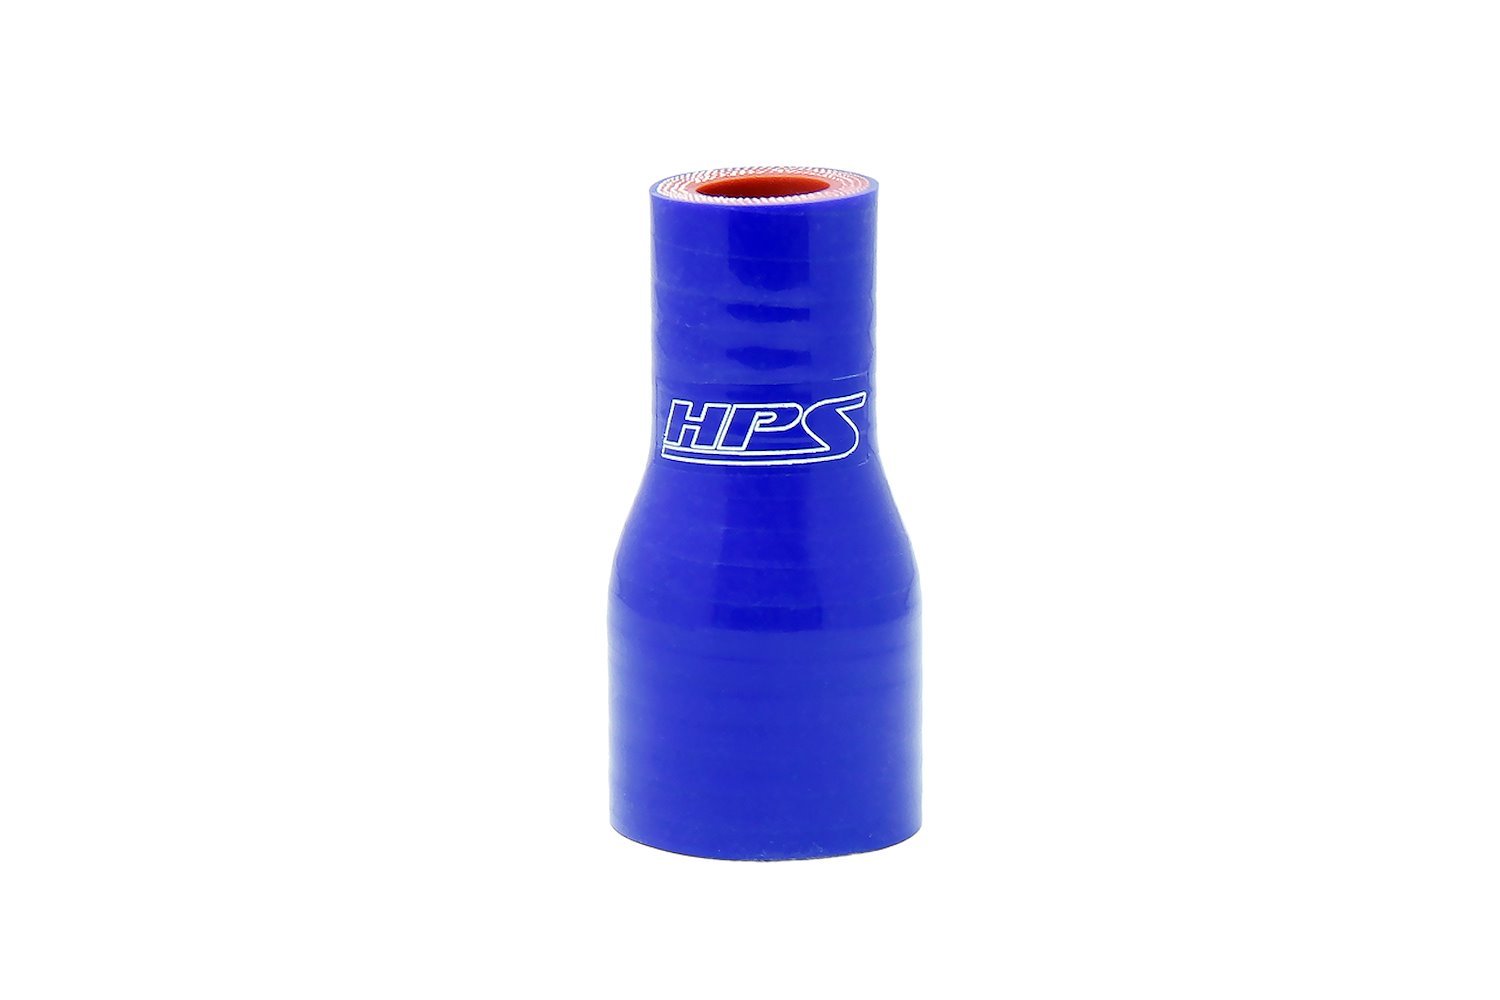 HTSR-138-150-BLUE Silicone Reducer Hose, High-Temp 4-Ply Reinforced, 1-3/8 in. - 1-1/2 in. ID, 3 in. Long, Blue